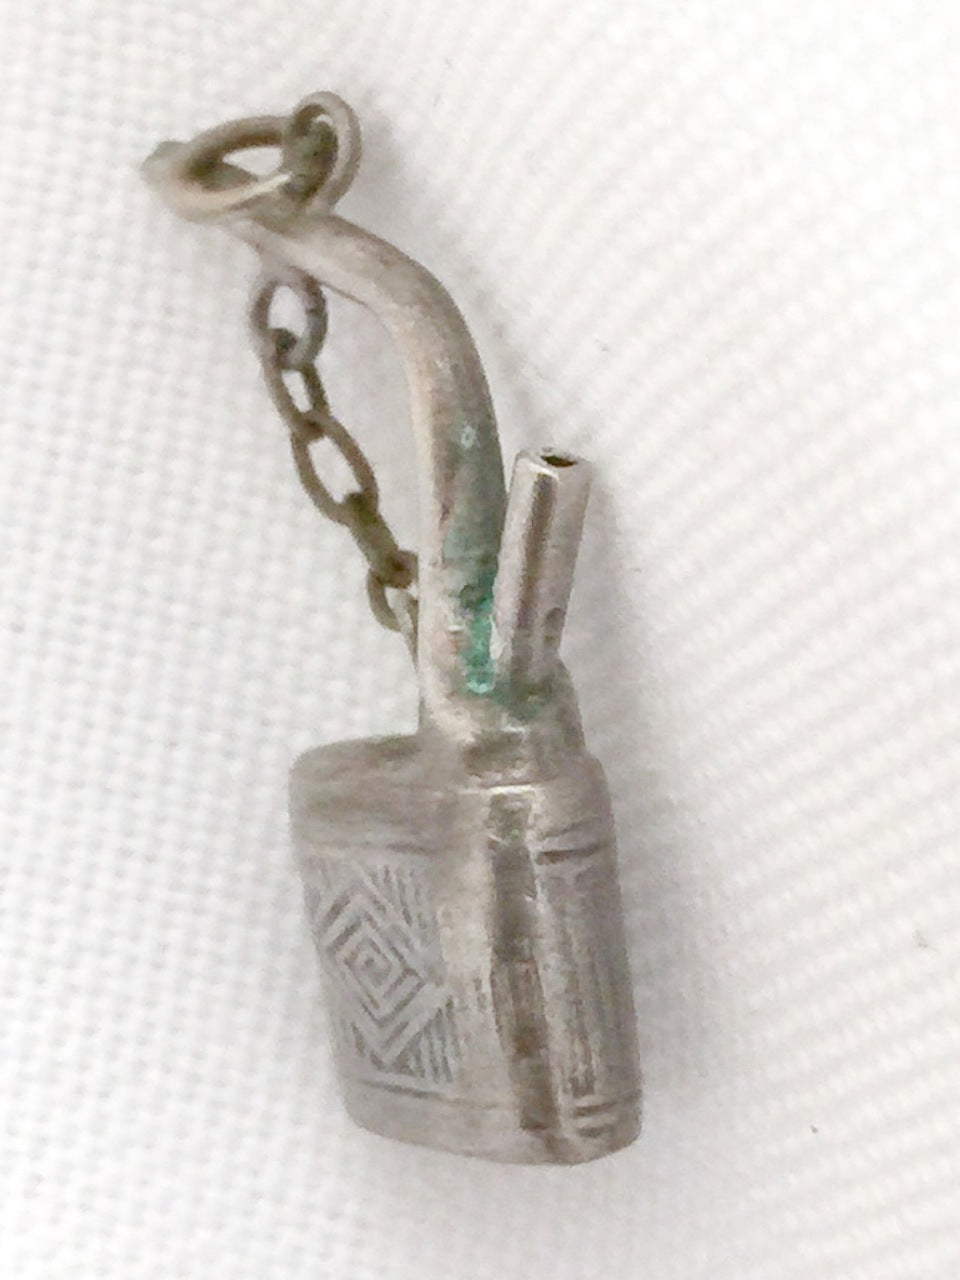 Oil Can Charm Sterling Silver Vintage